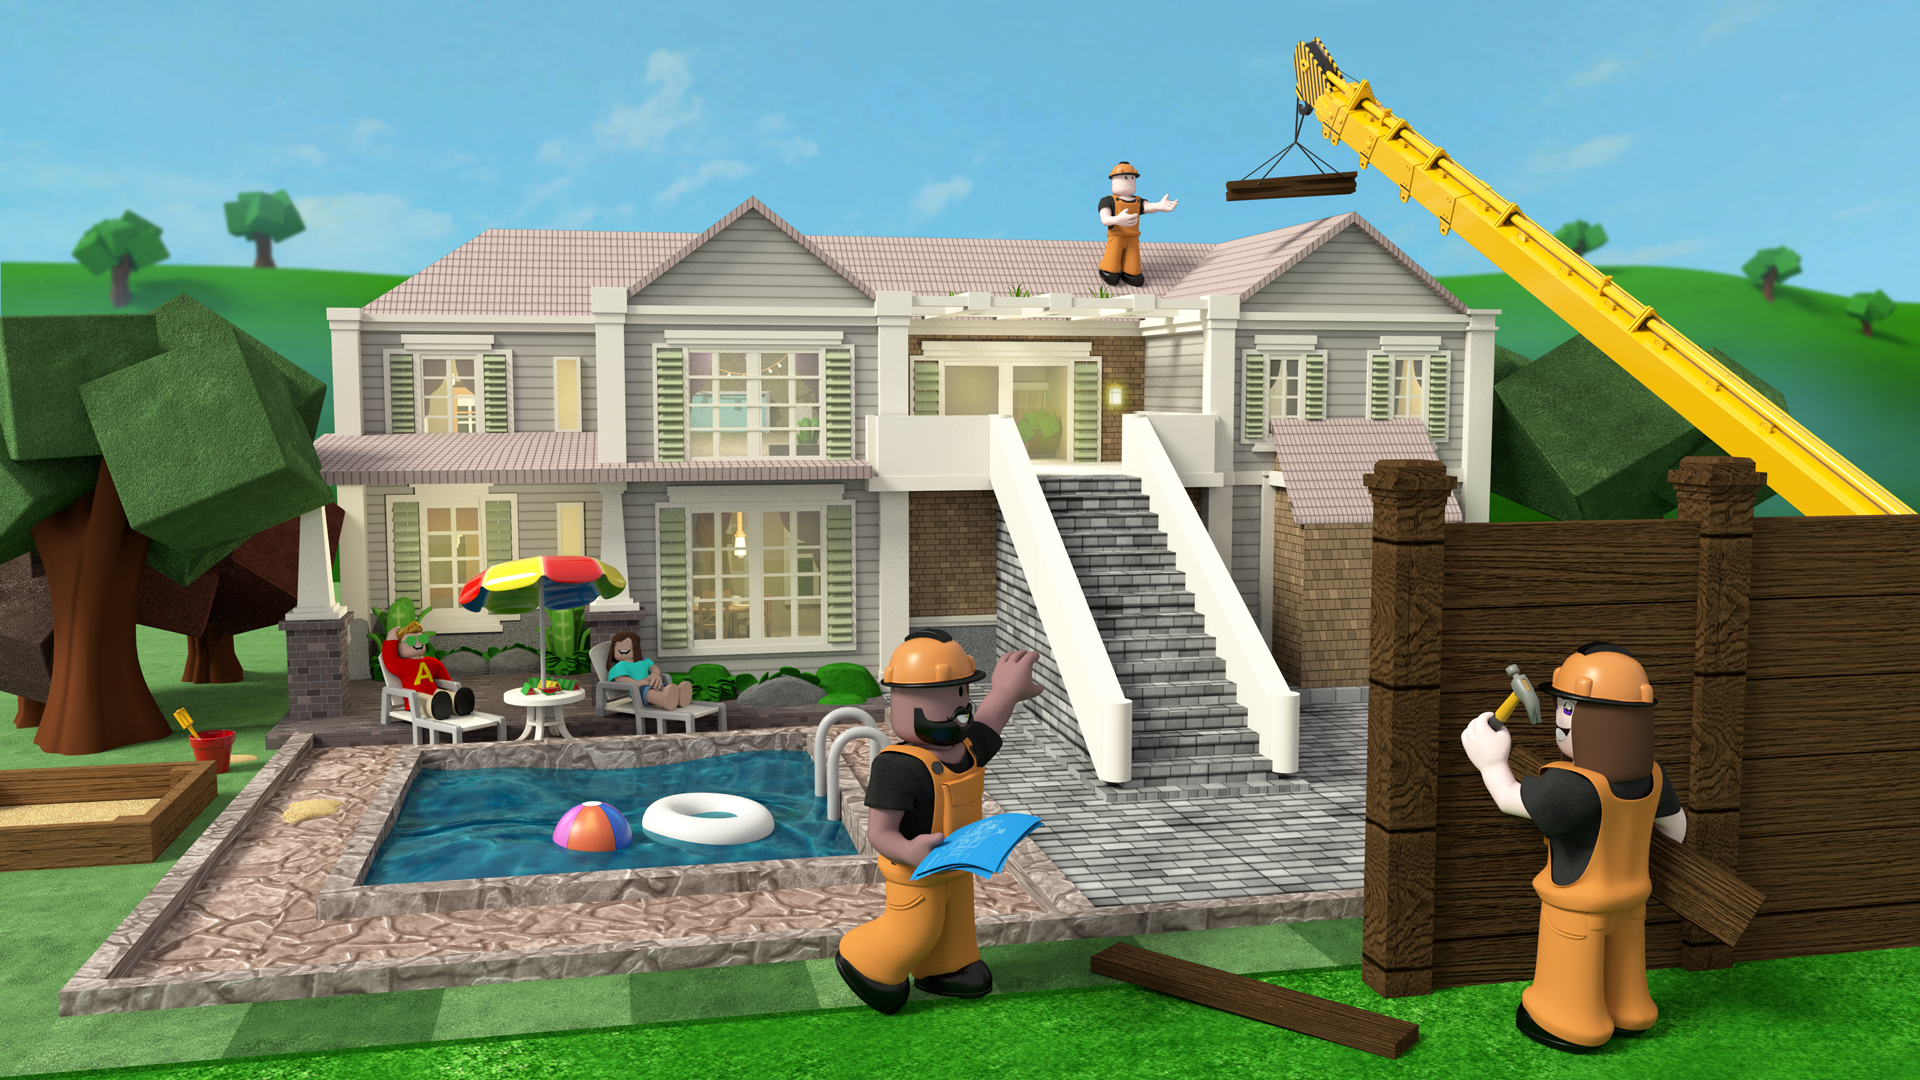 An Inside Look At Roblox The Gaming Universe That S Exploded To 164 000 000 Users By Spero Ventures Spero Ventures Sep 2020 Medium - lets just live roblox id roblox idea generator